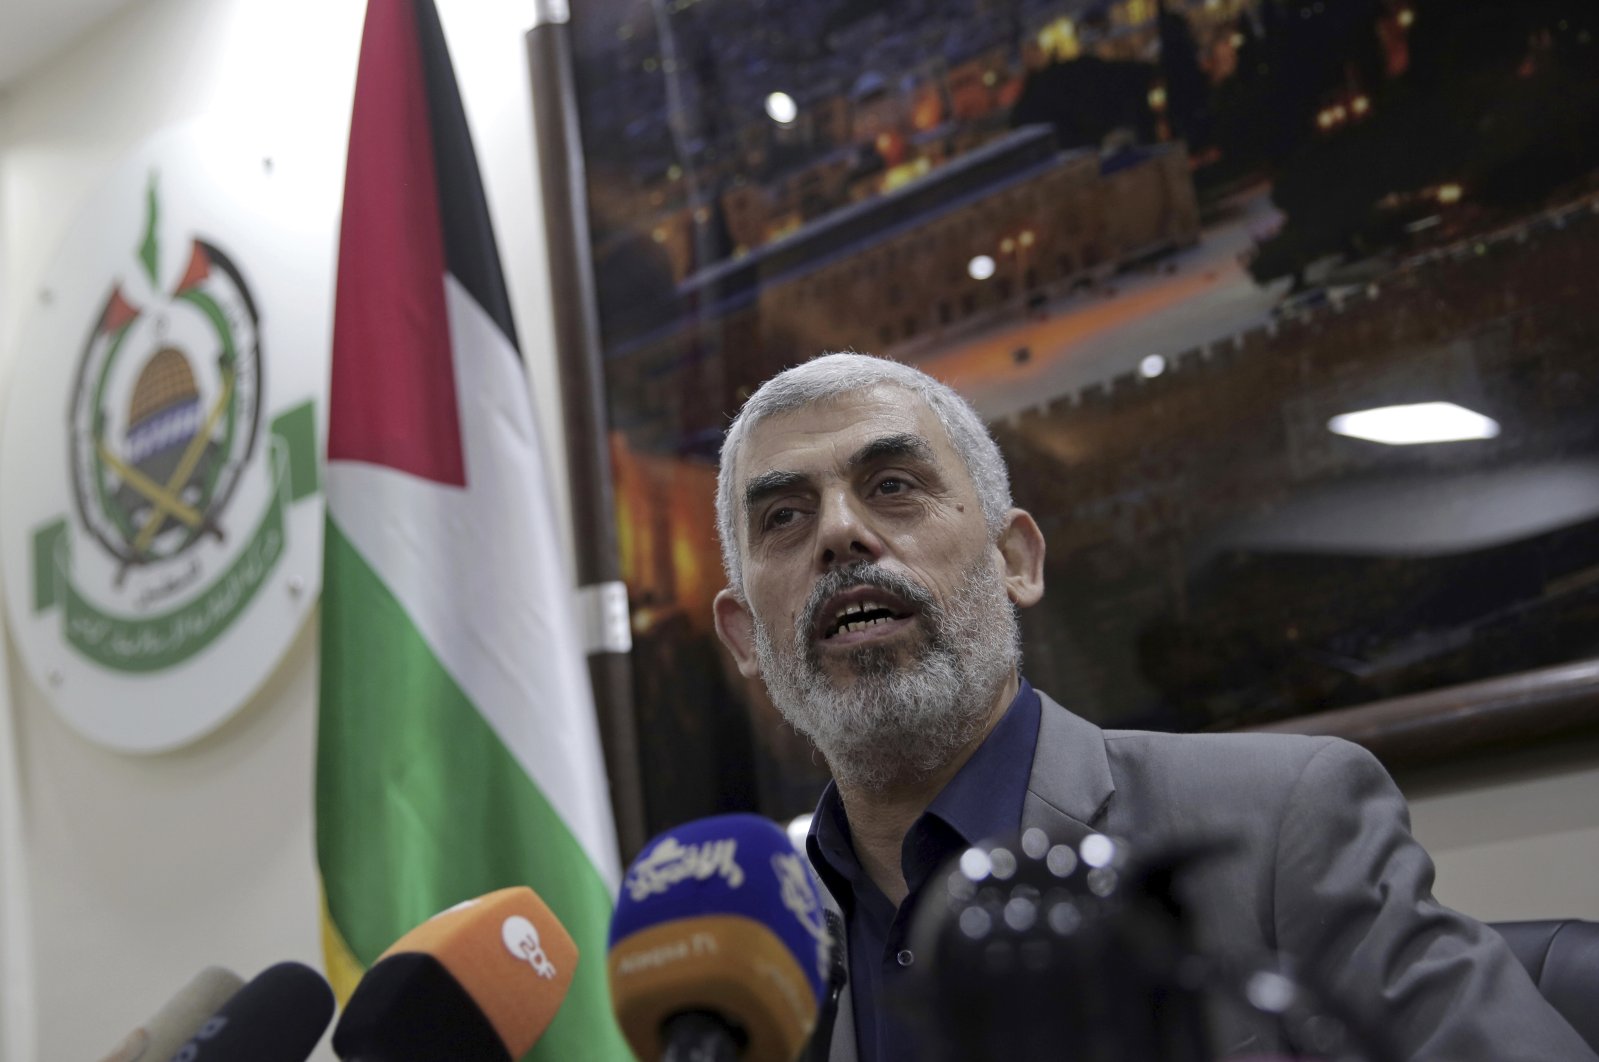 Yehiyeh Sinwar, the Hamas resistance group's leader in the Gaza Strip, speaks to foreign correspondents, in his office in Gaza City, May 10, 2018. (AP Photo)